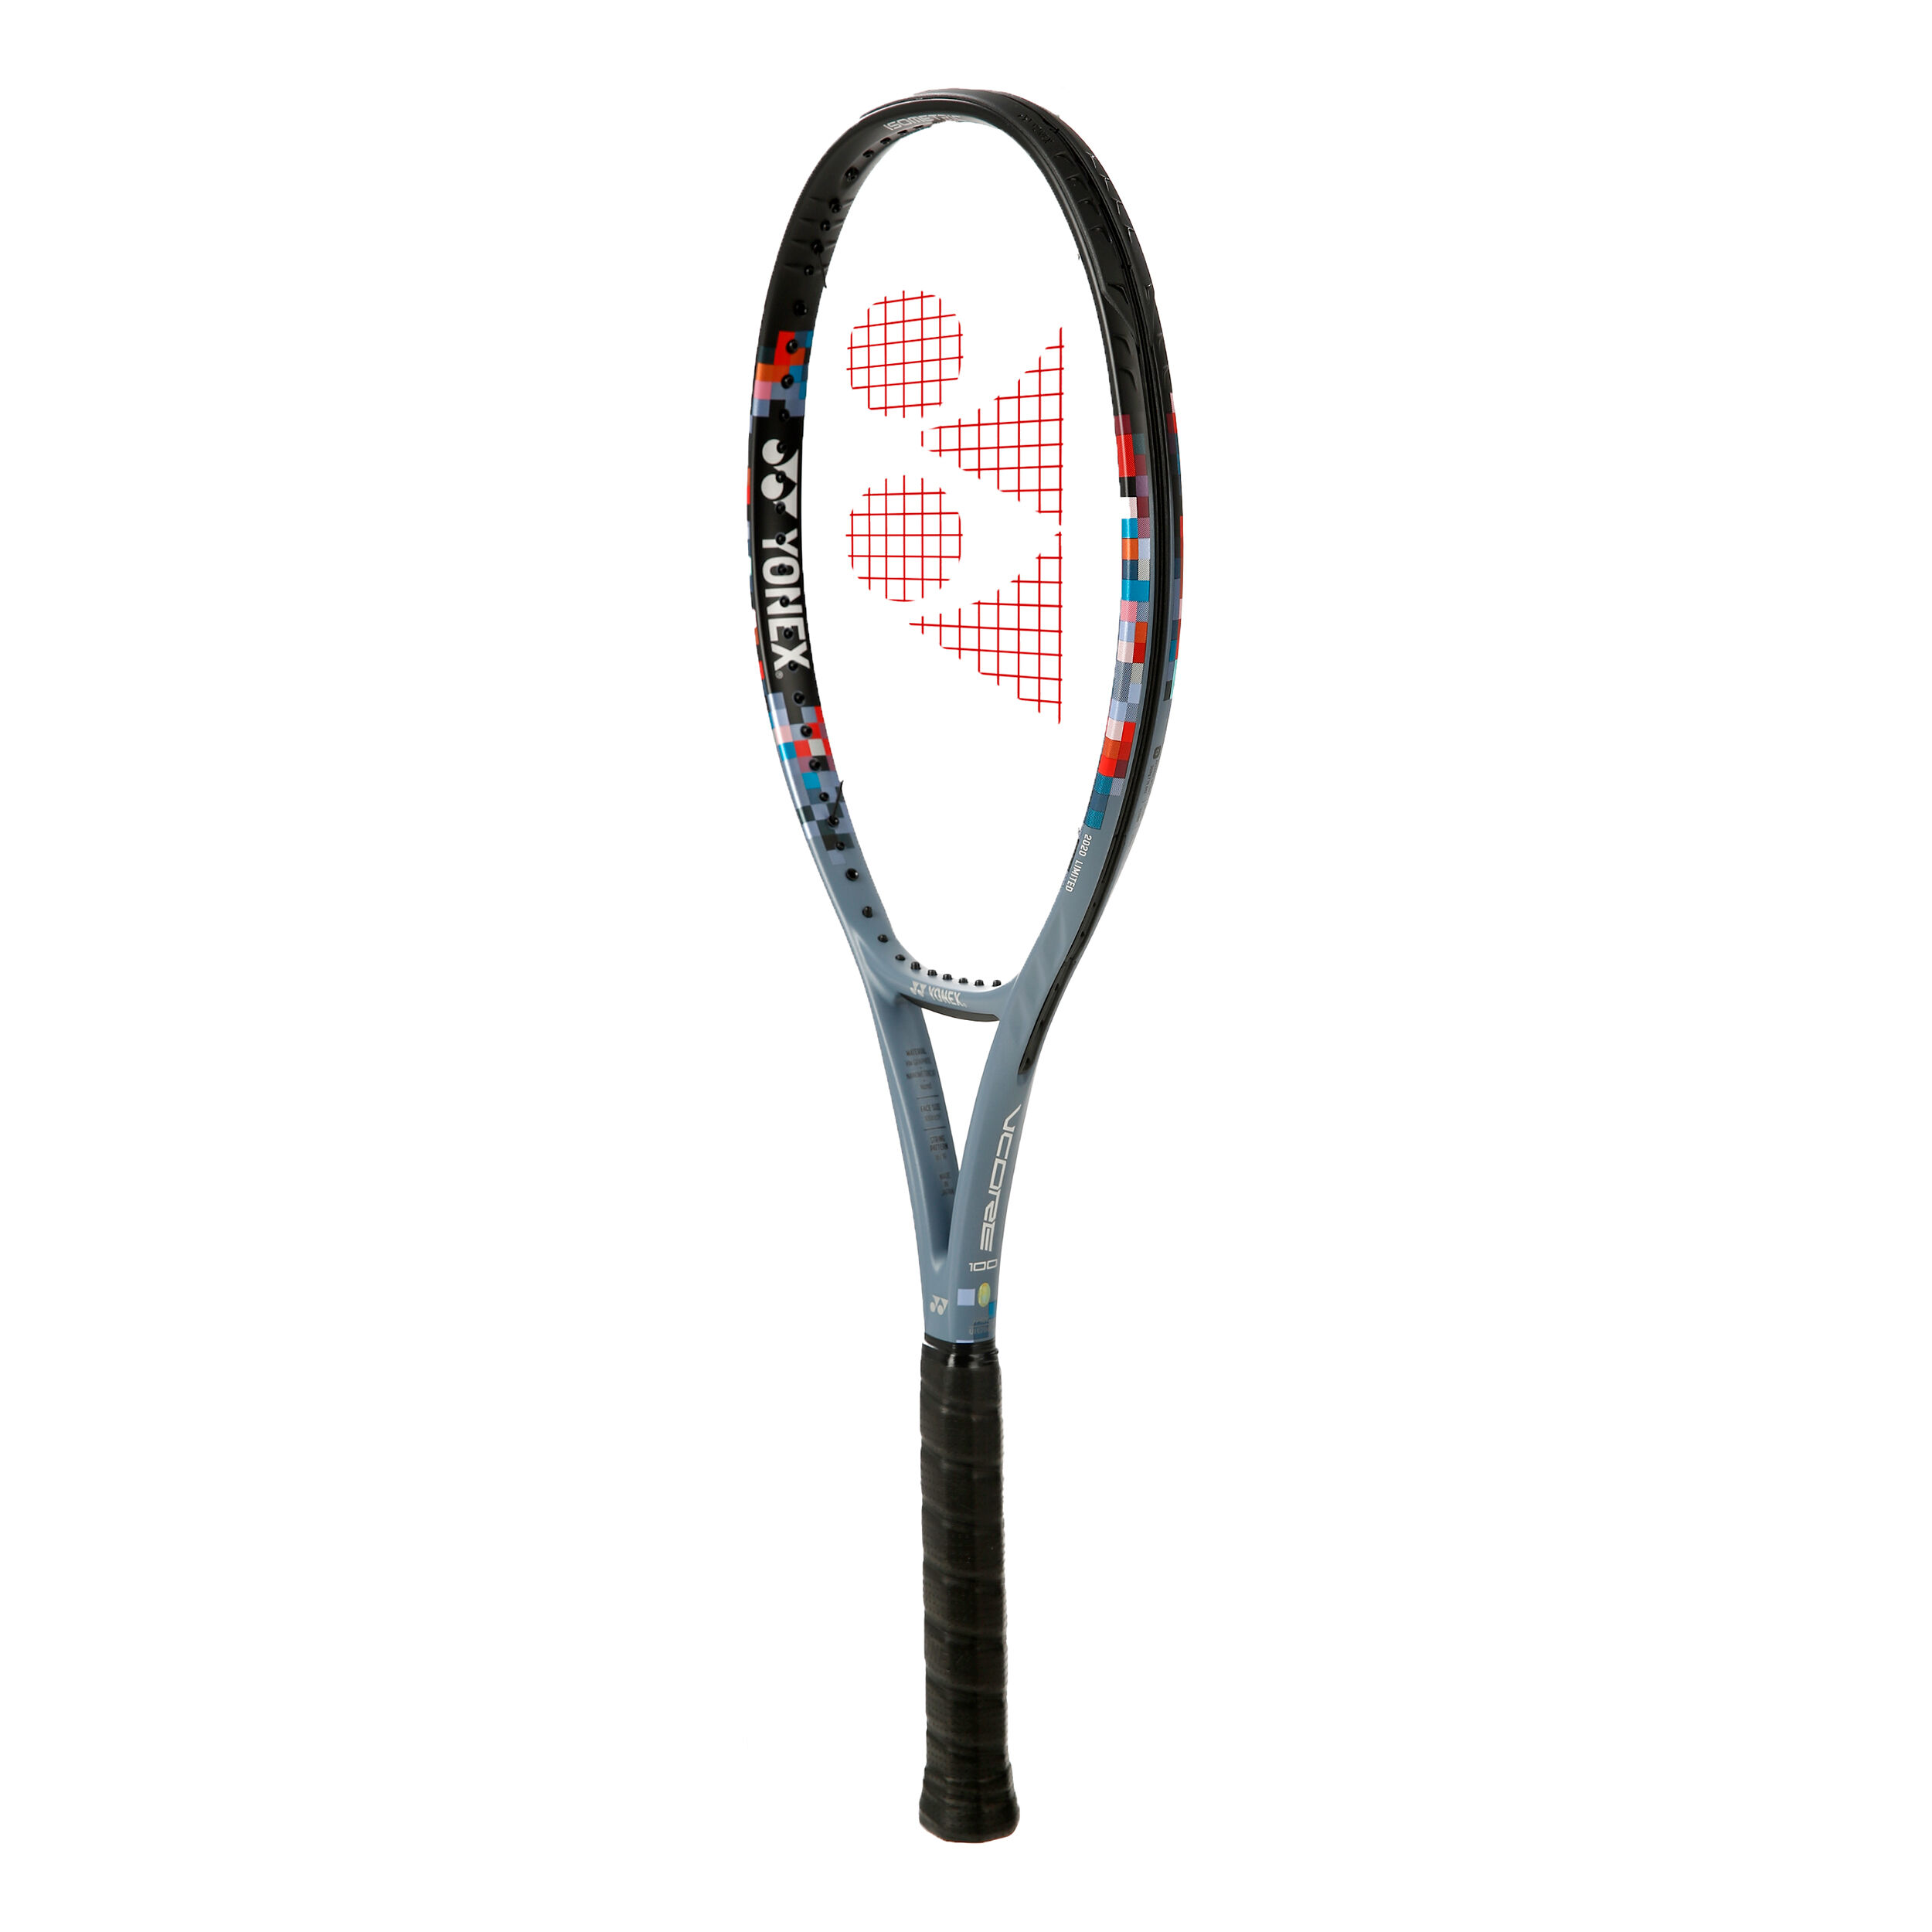 online | Tennis-Point buy Yonex VCORE 100 300g (Limited Edition)